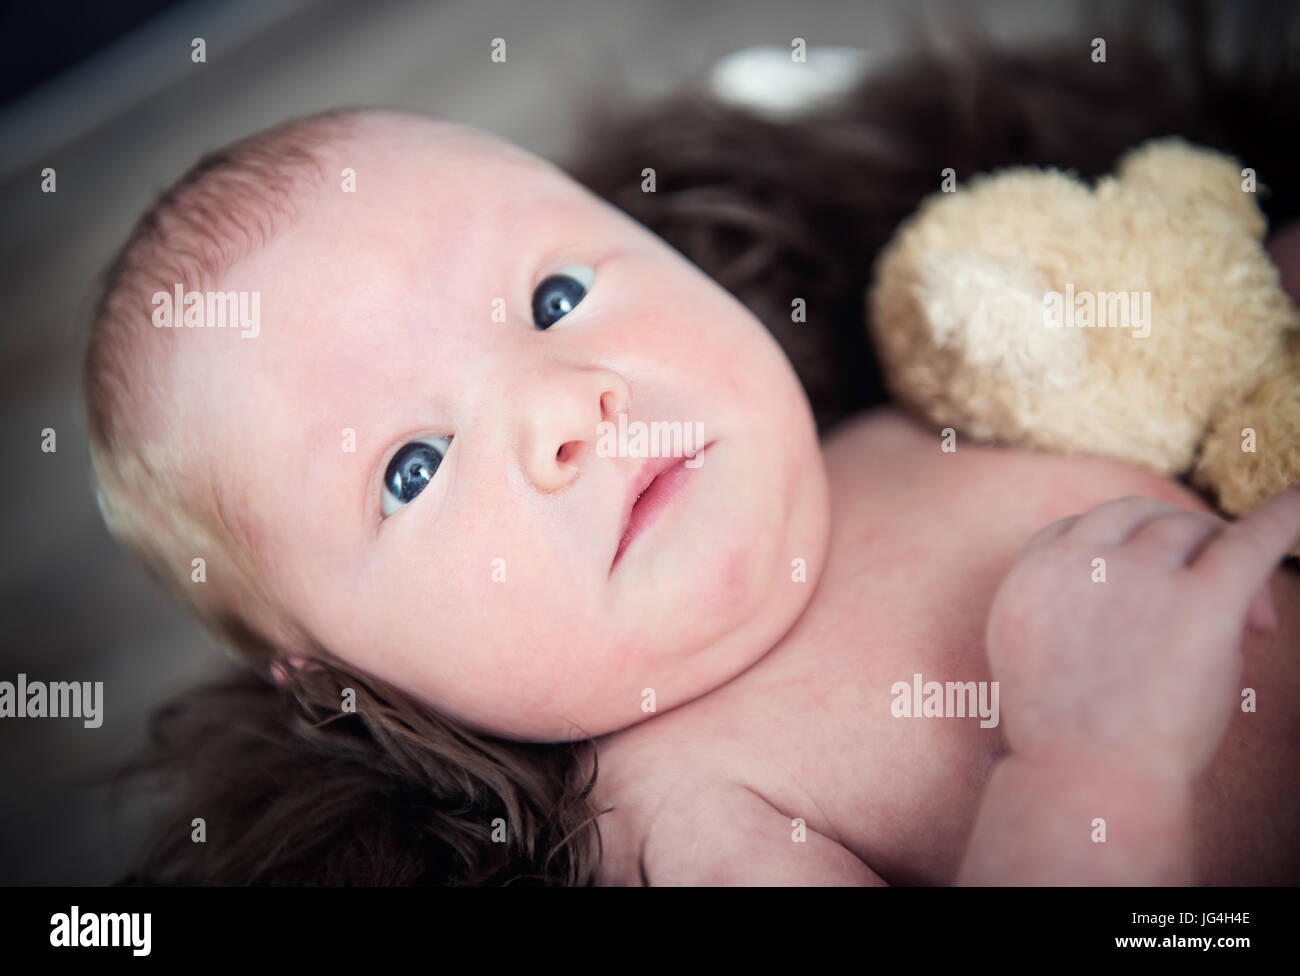 Newborn baby smiling looking at the camera Stock Photo